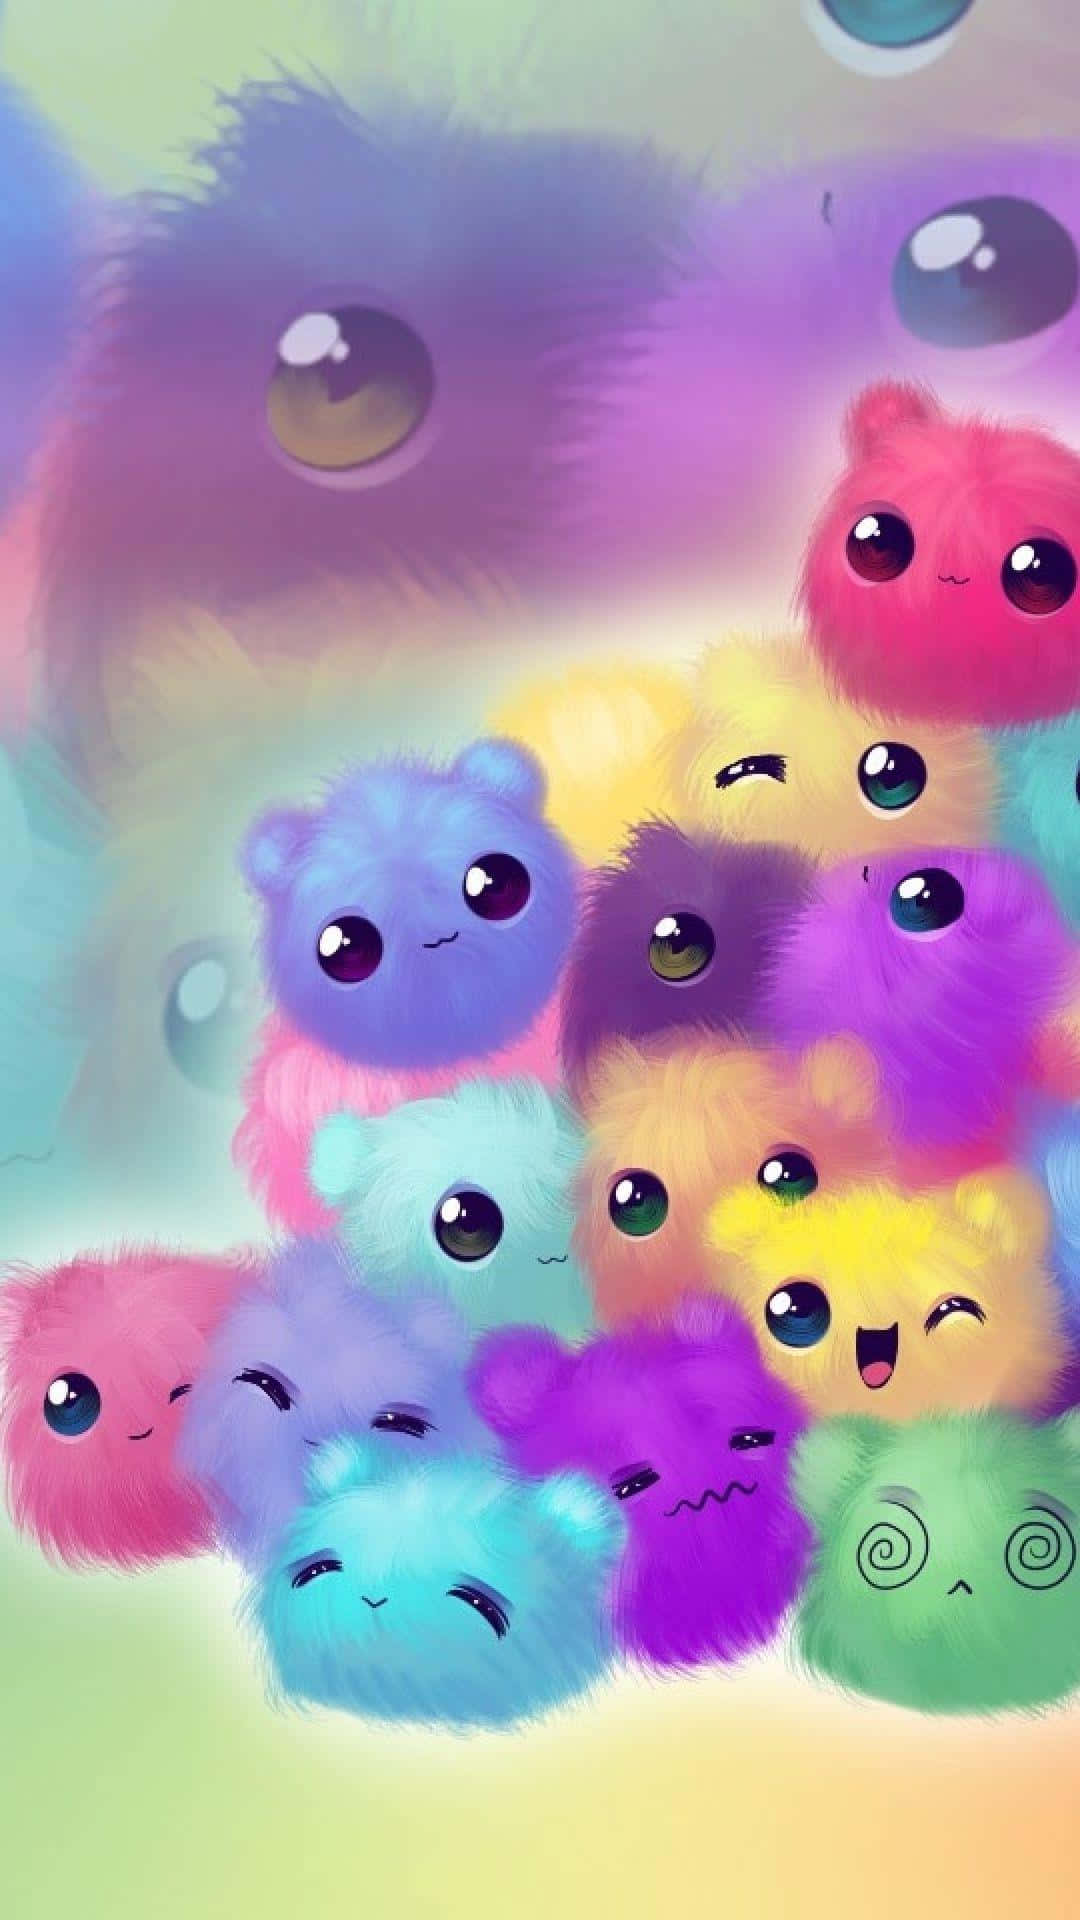 Contemplate with this cute phone wallpaper